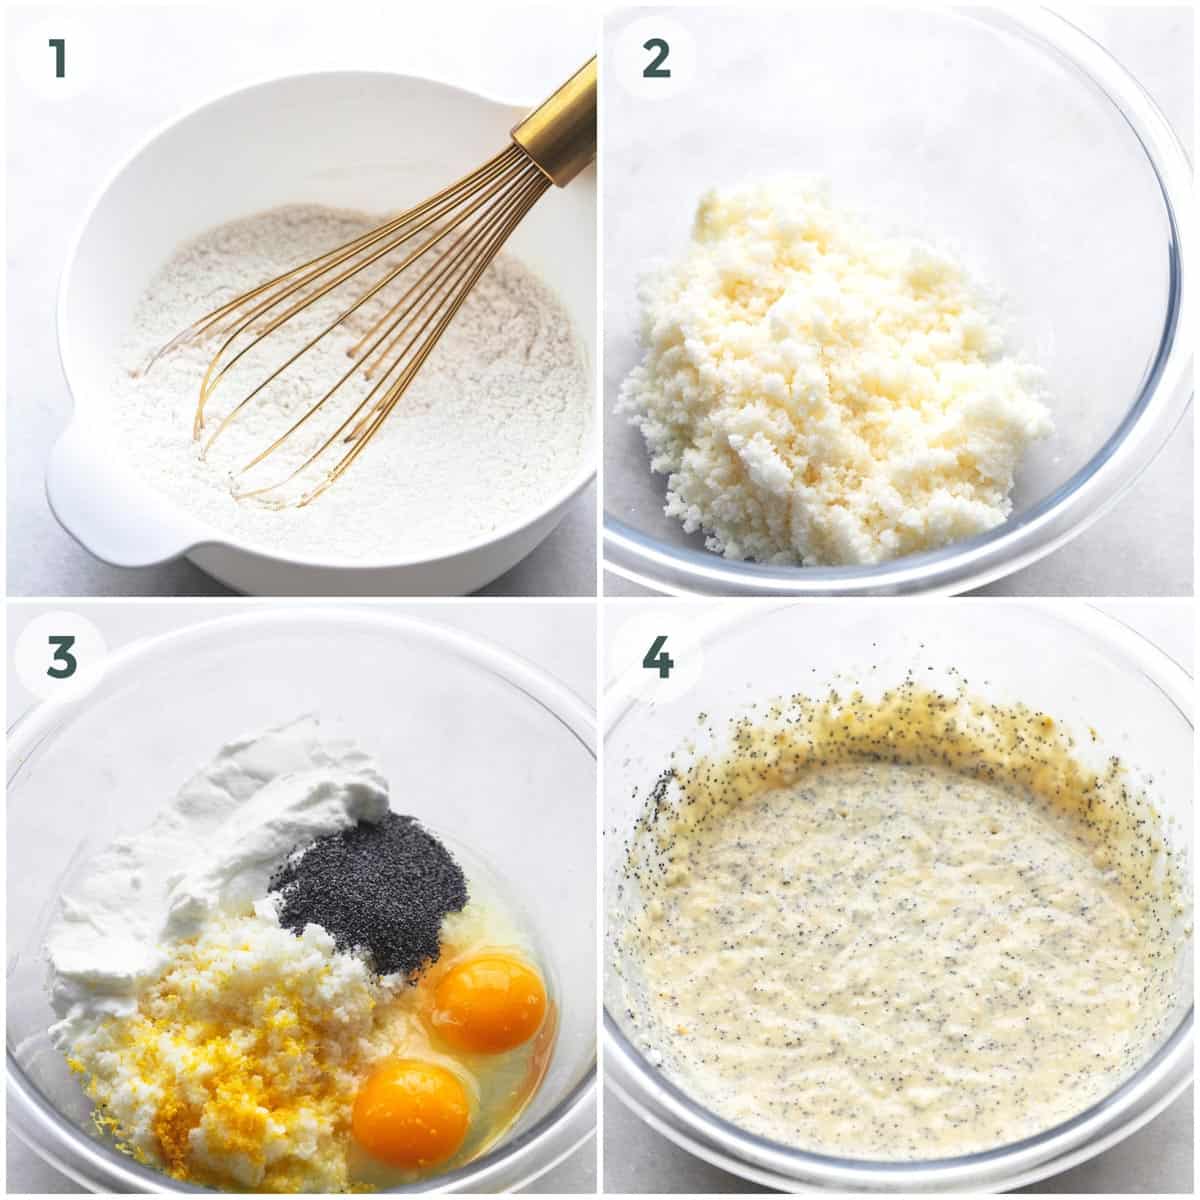 collage depicting preparation of muffin batter.